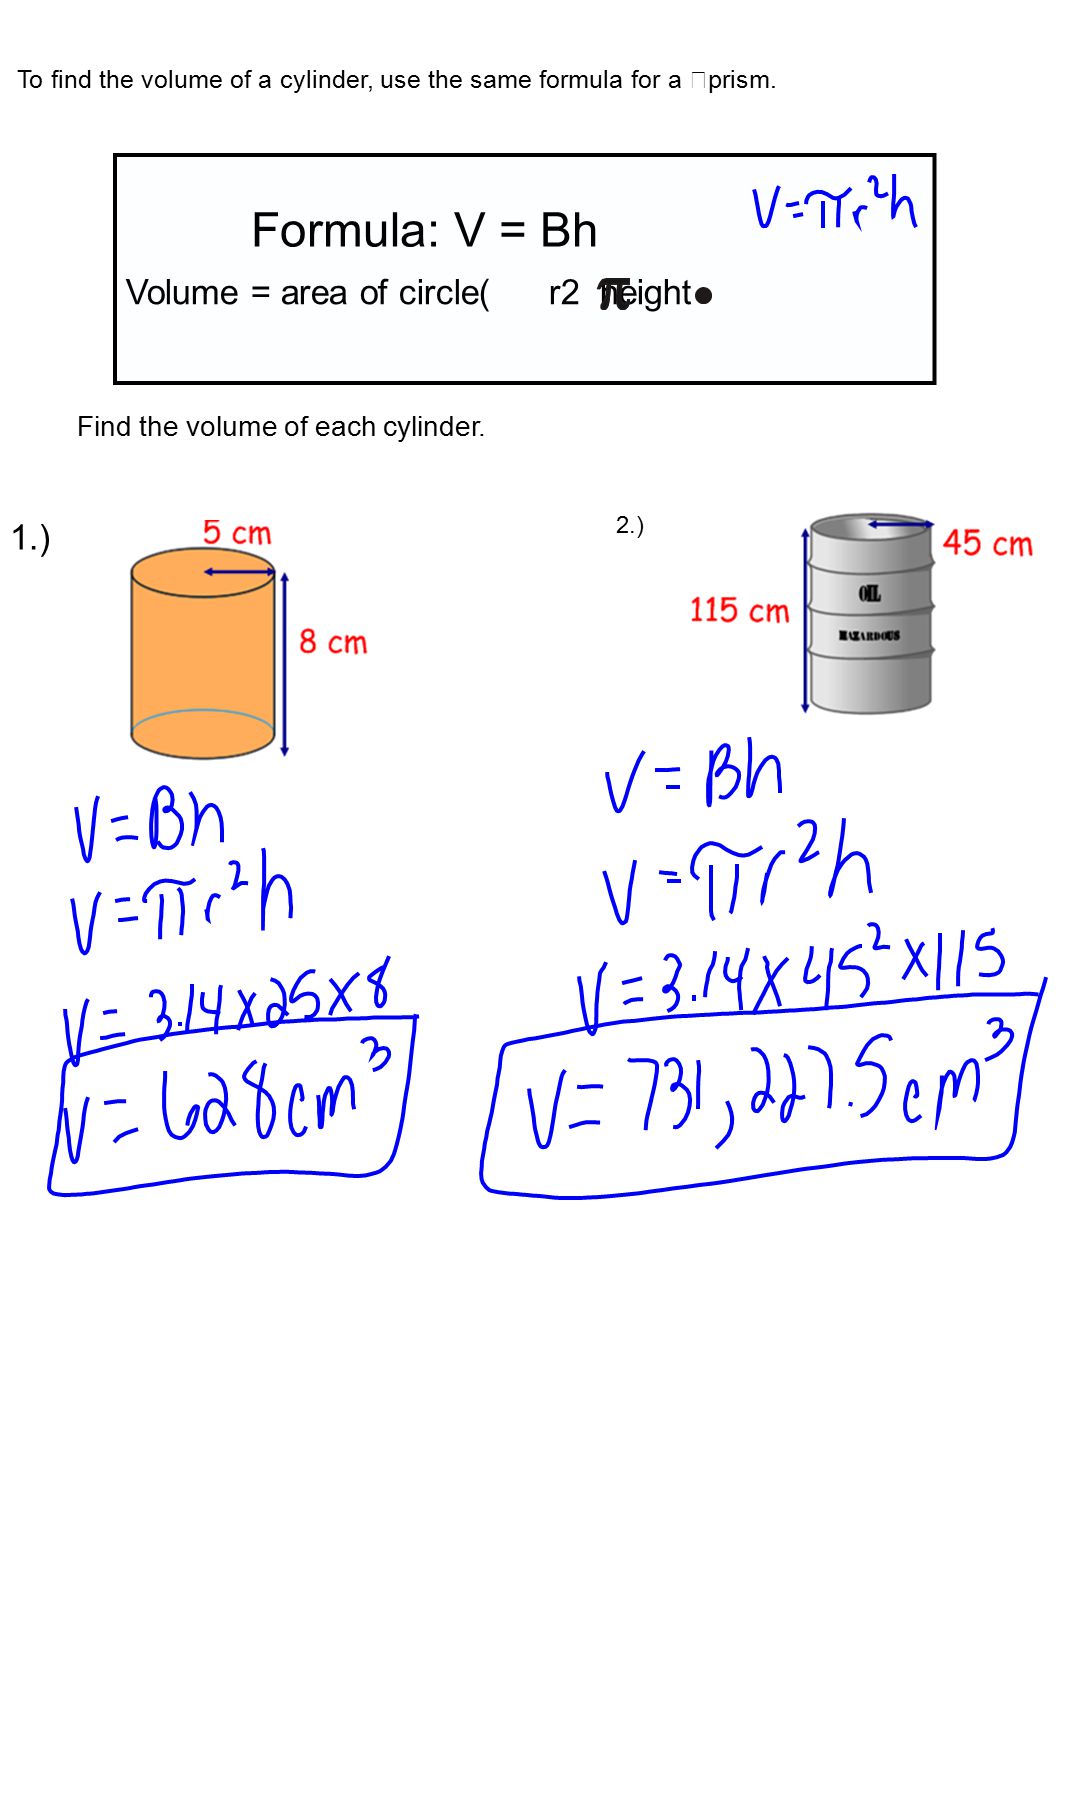 Formula: V = Bh Volume = area of circle( r2 height To find the volume of a cylinder, use the same formula for a prism.